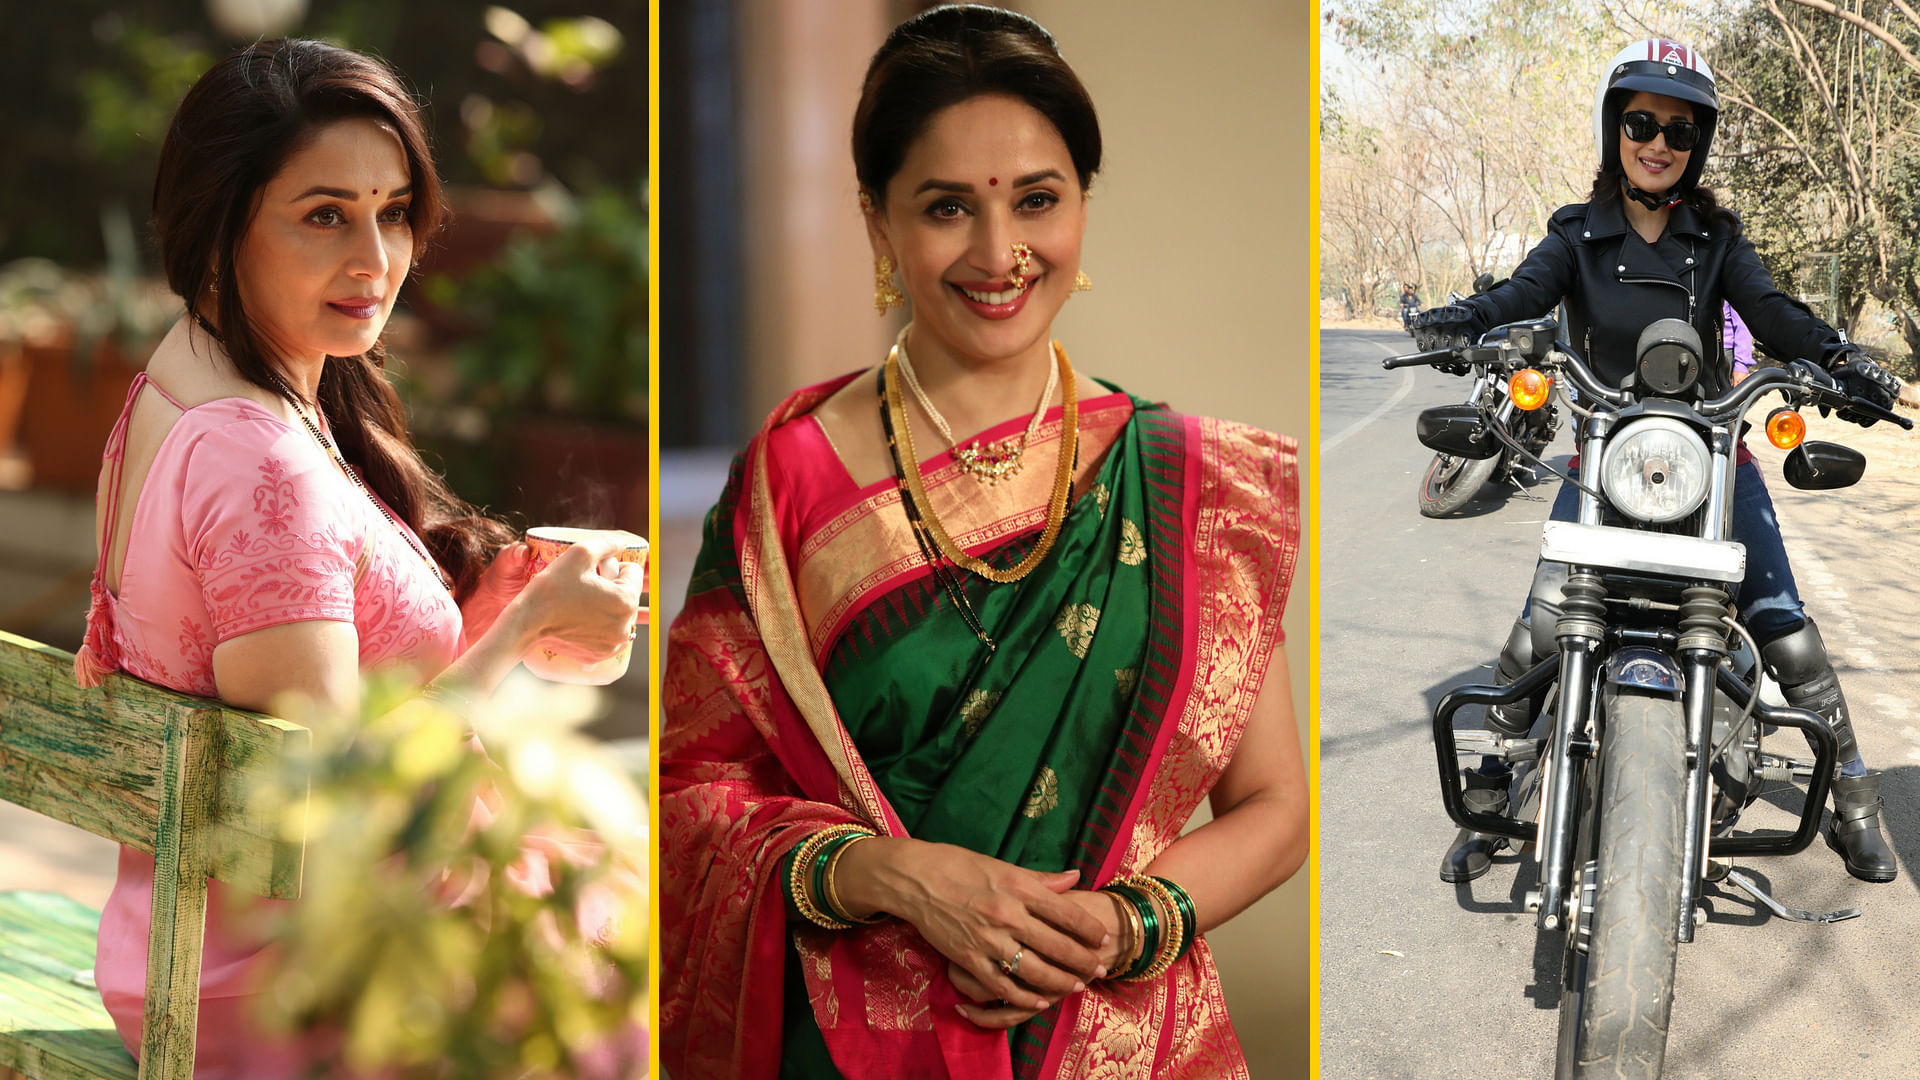 Many shades of Madhuri Dixit in ‘Bucket List’. (Photo Courtesy: Dharma Productions)